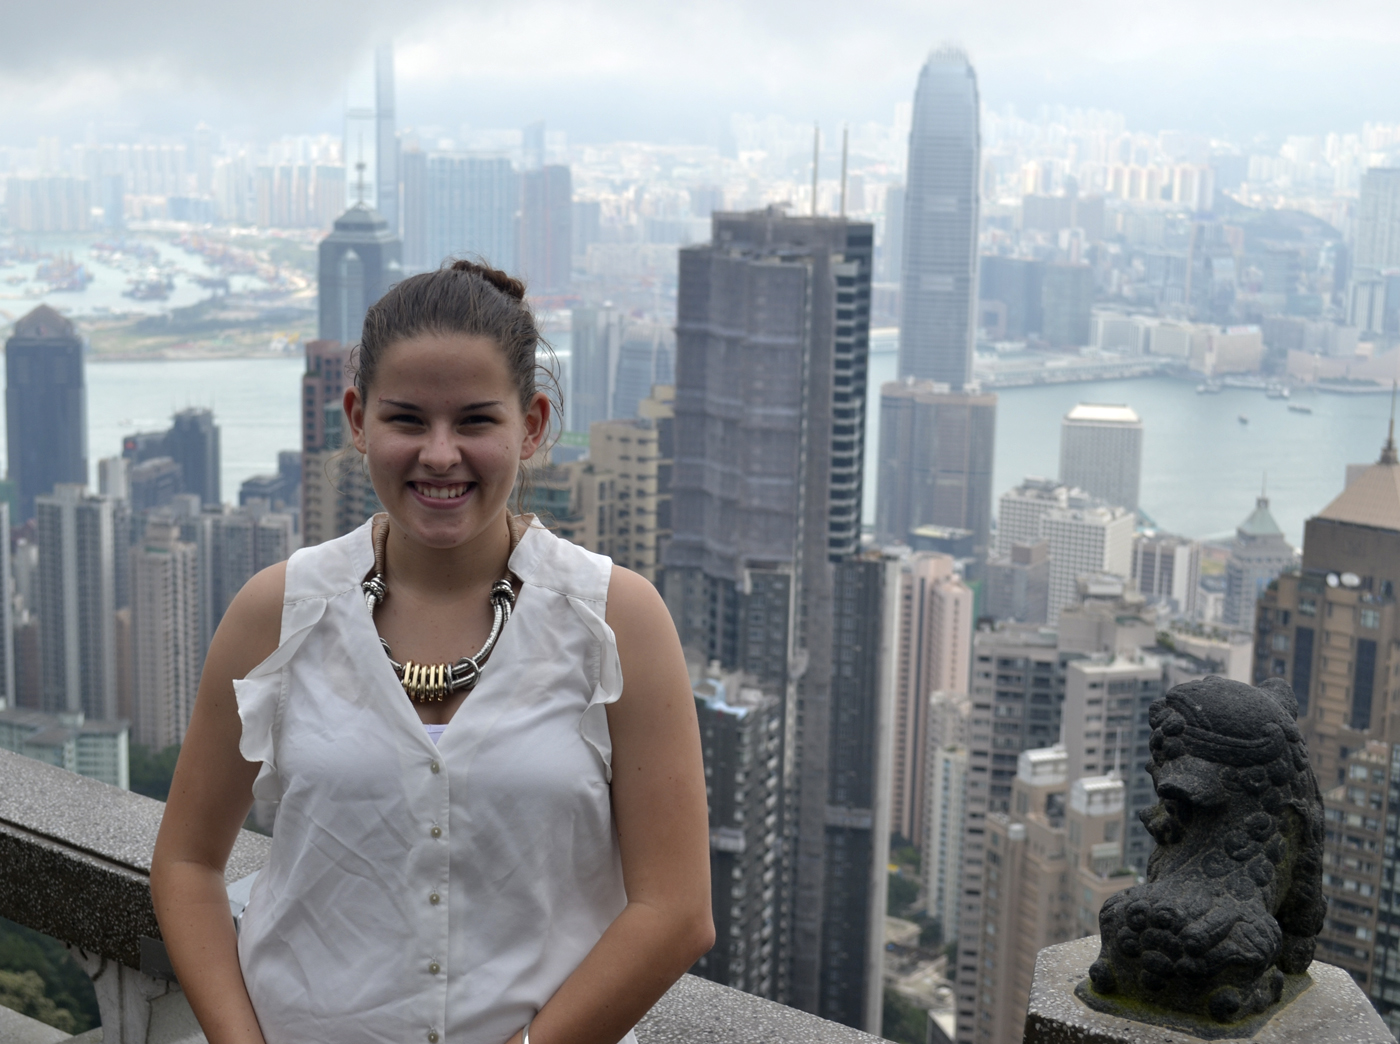 Griffith student Elise Giles on a rooftop lookout with Hong Kong city skyline in background